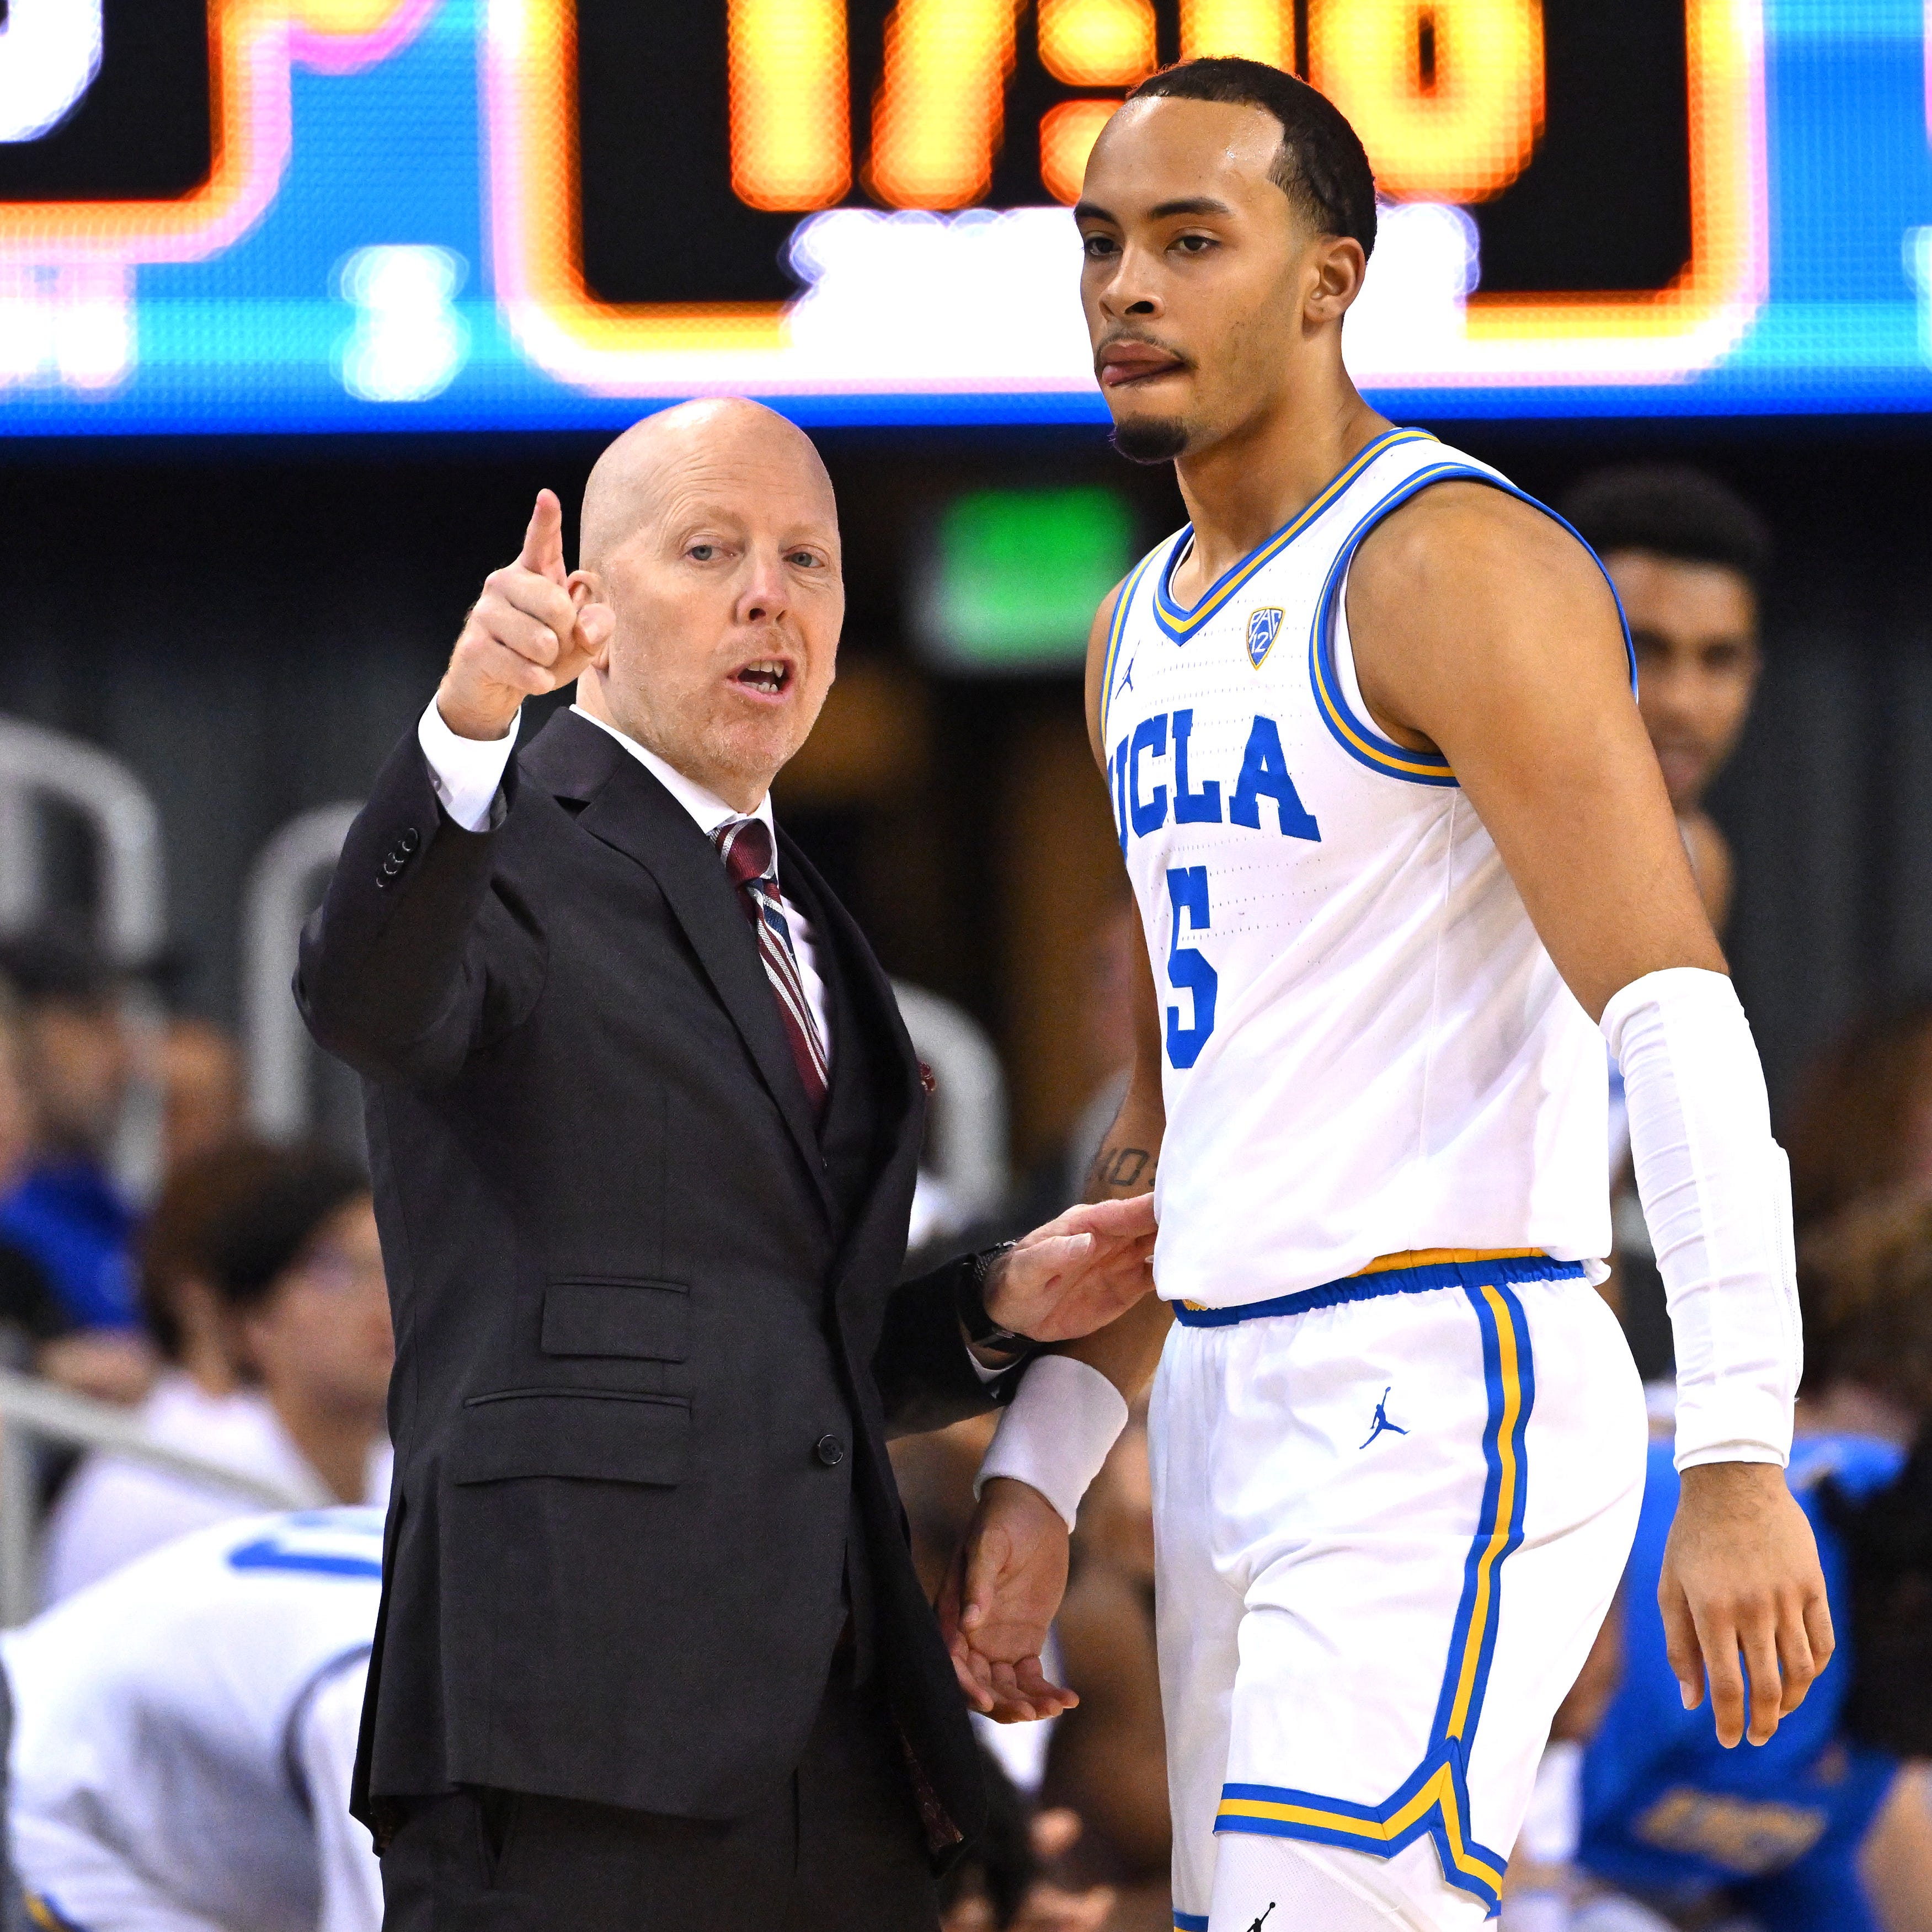 UCLA coach Mick Cronin instructs guard Amari Bailey. The freshman on Cronin: "Coach says there are two kinds of people, one who gets the job done and one who says 'I tried'. He asked us, 'Who do you want to be?' "